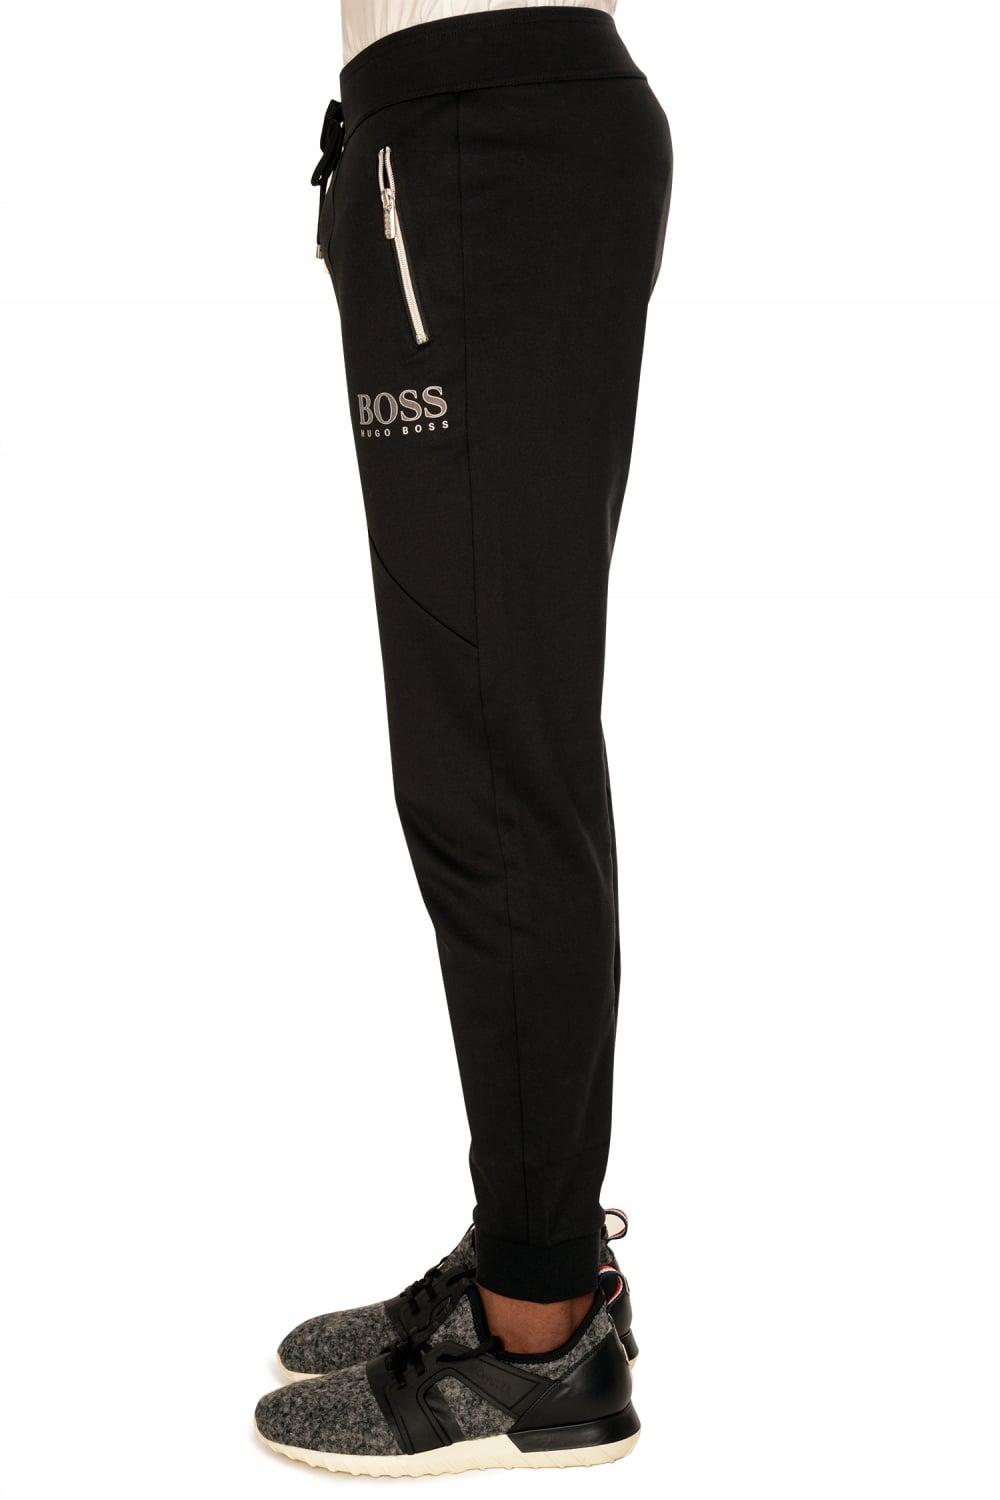 hugo boss black and gold tracksuit bottoms